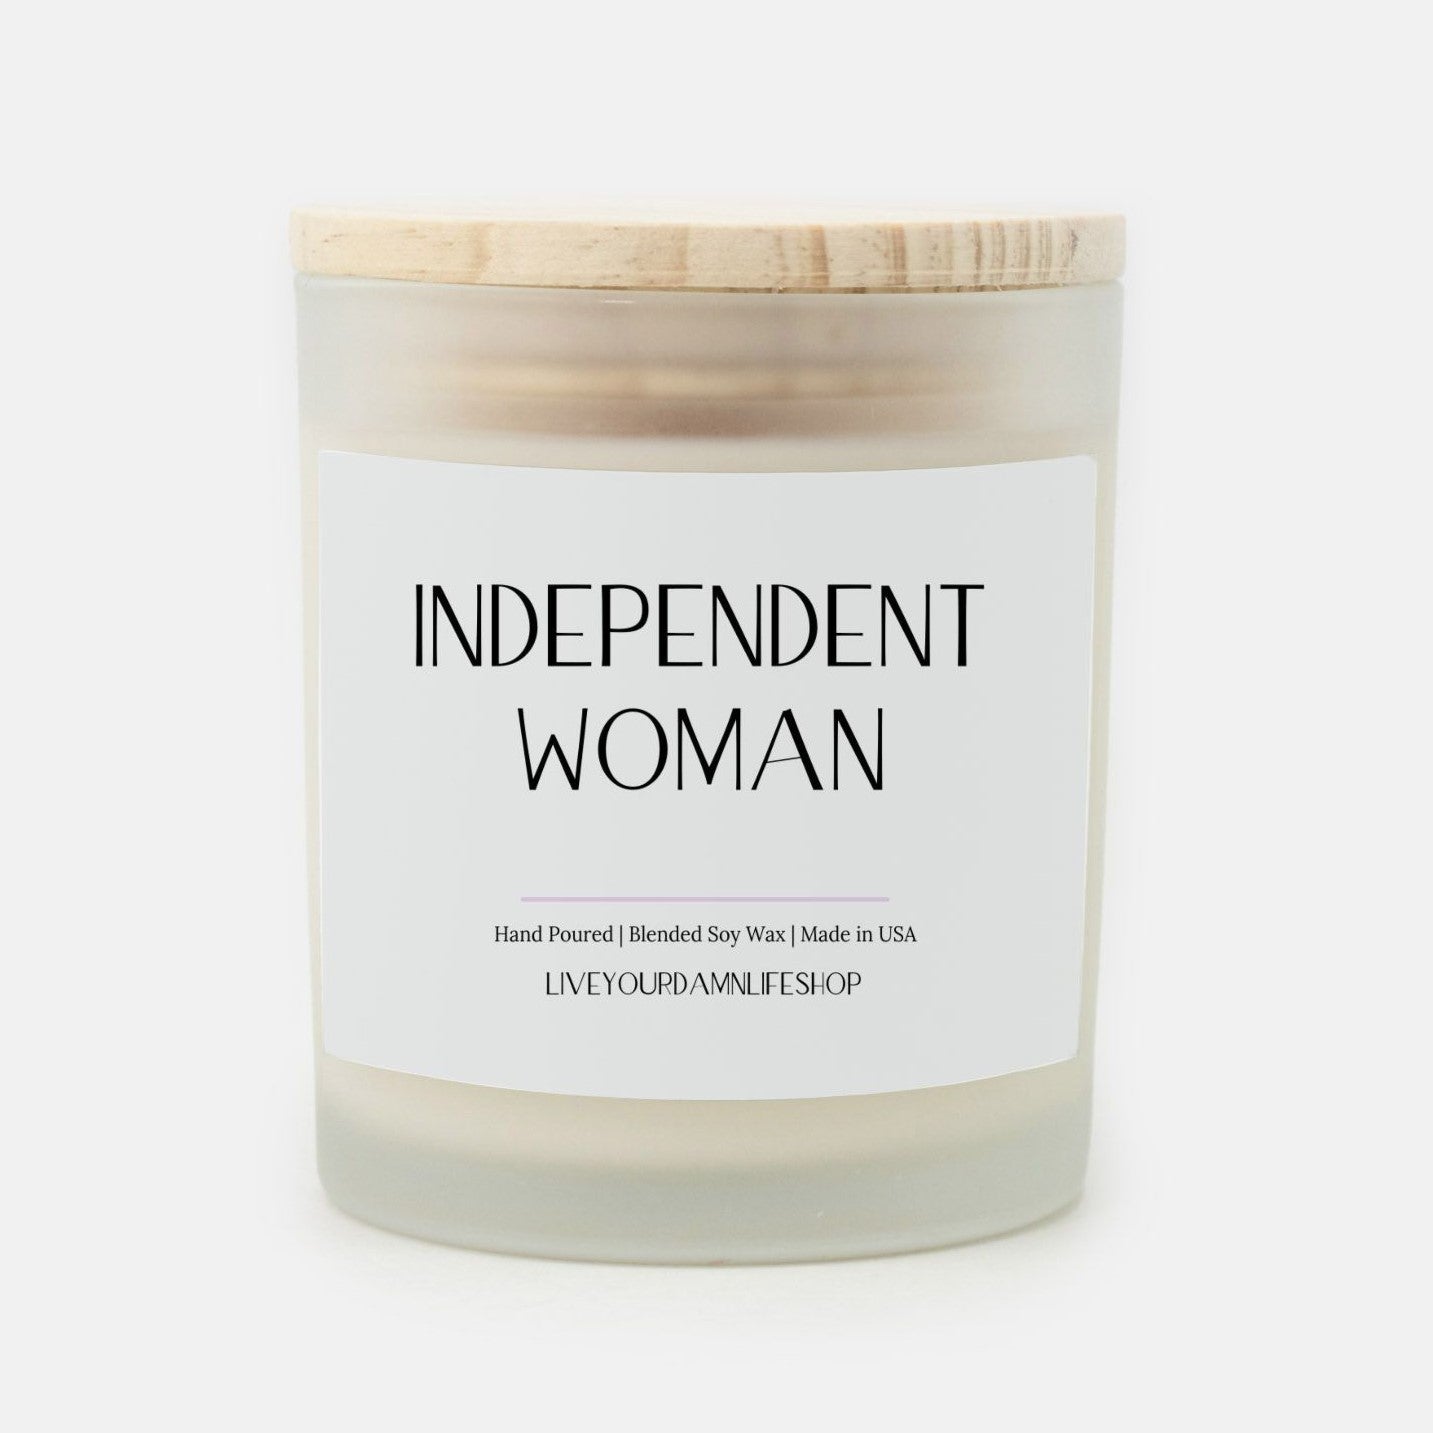 Independent Woman - Frosted Glass Candle